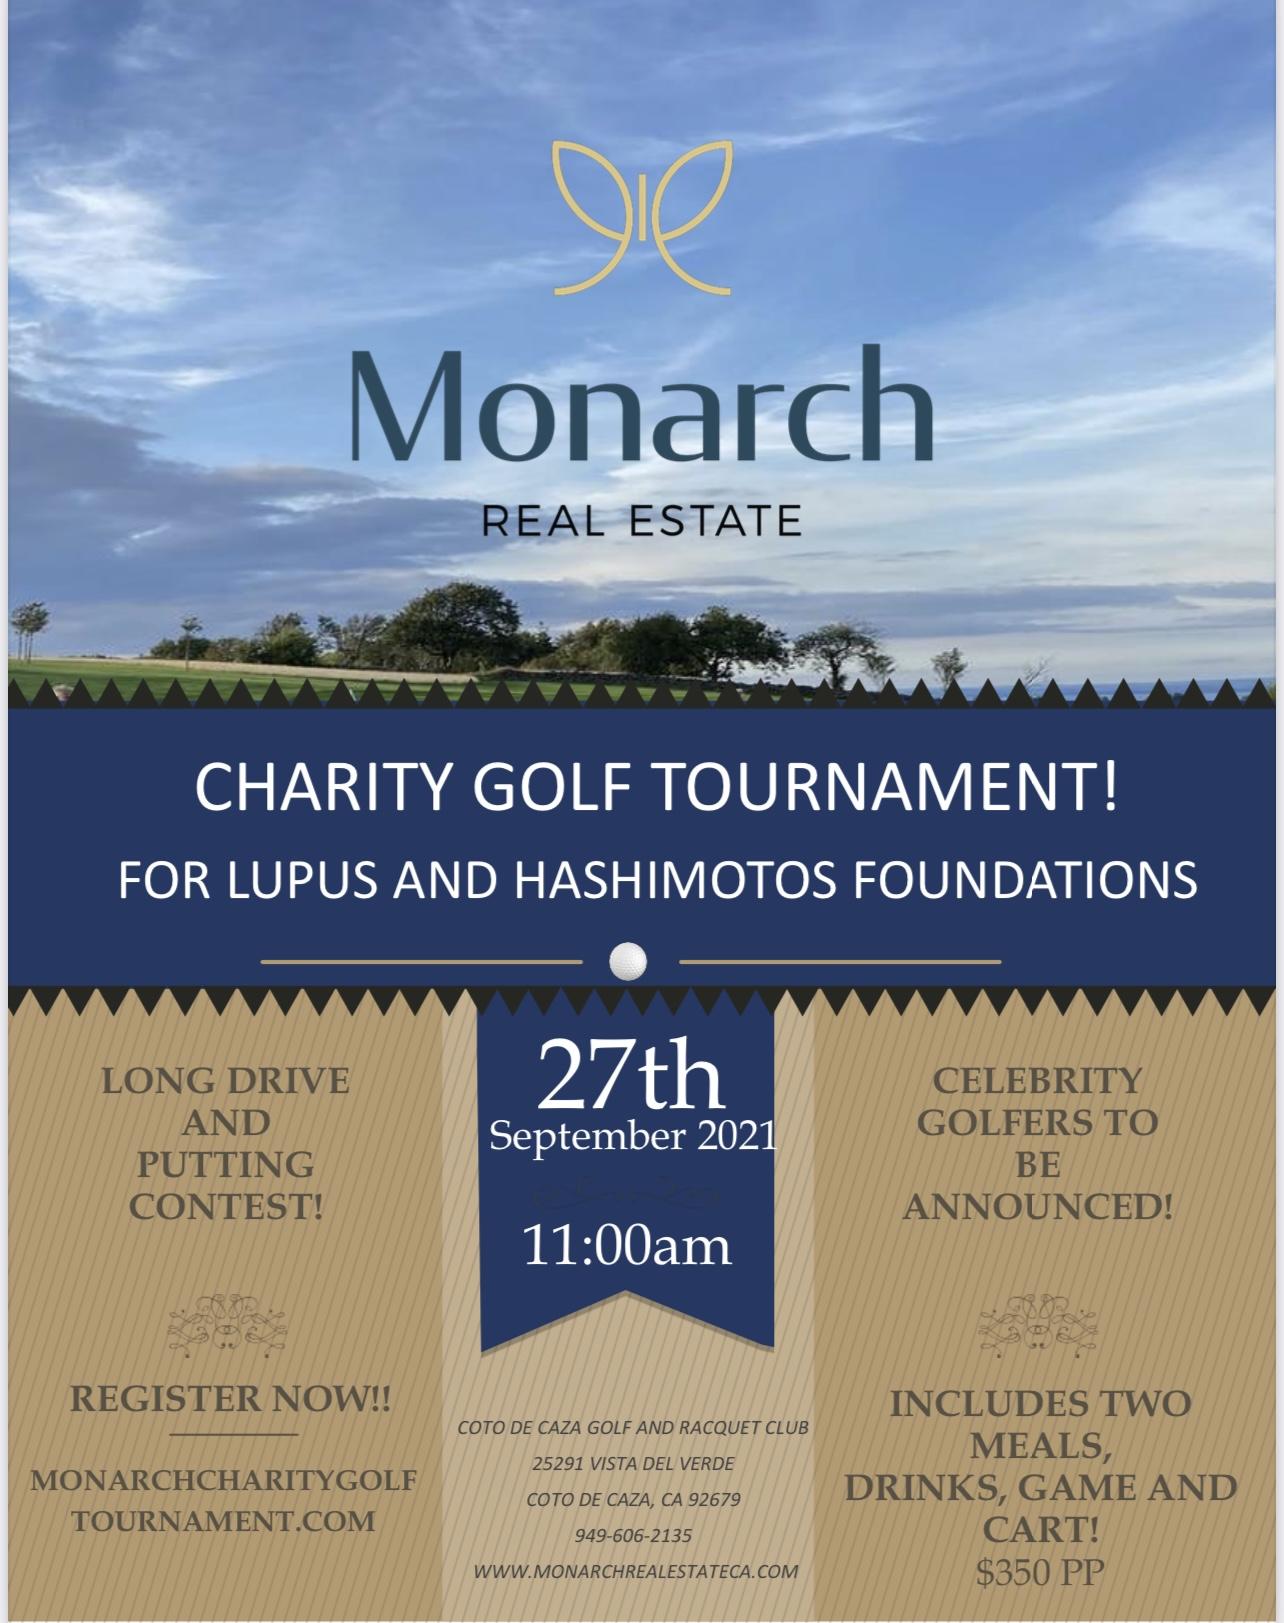 Monarch Real Estate Charity Golf Tournament!